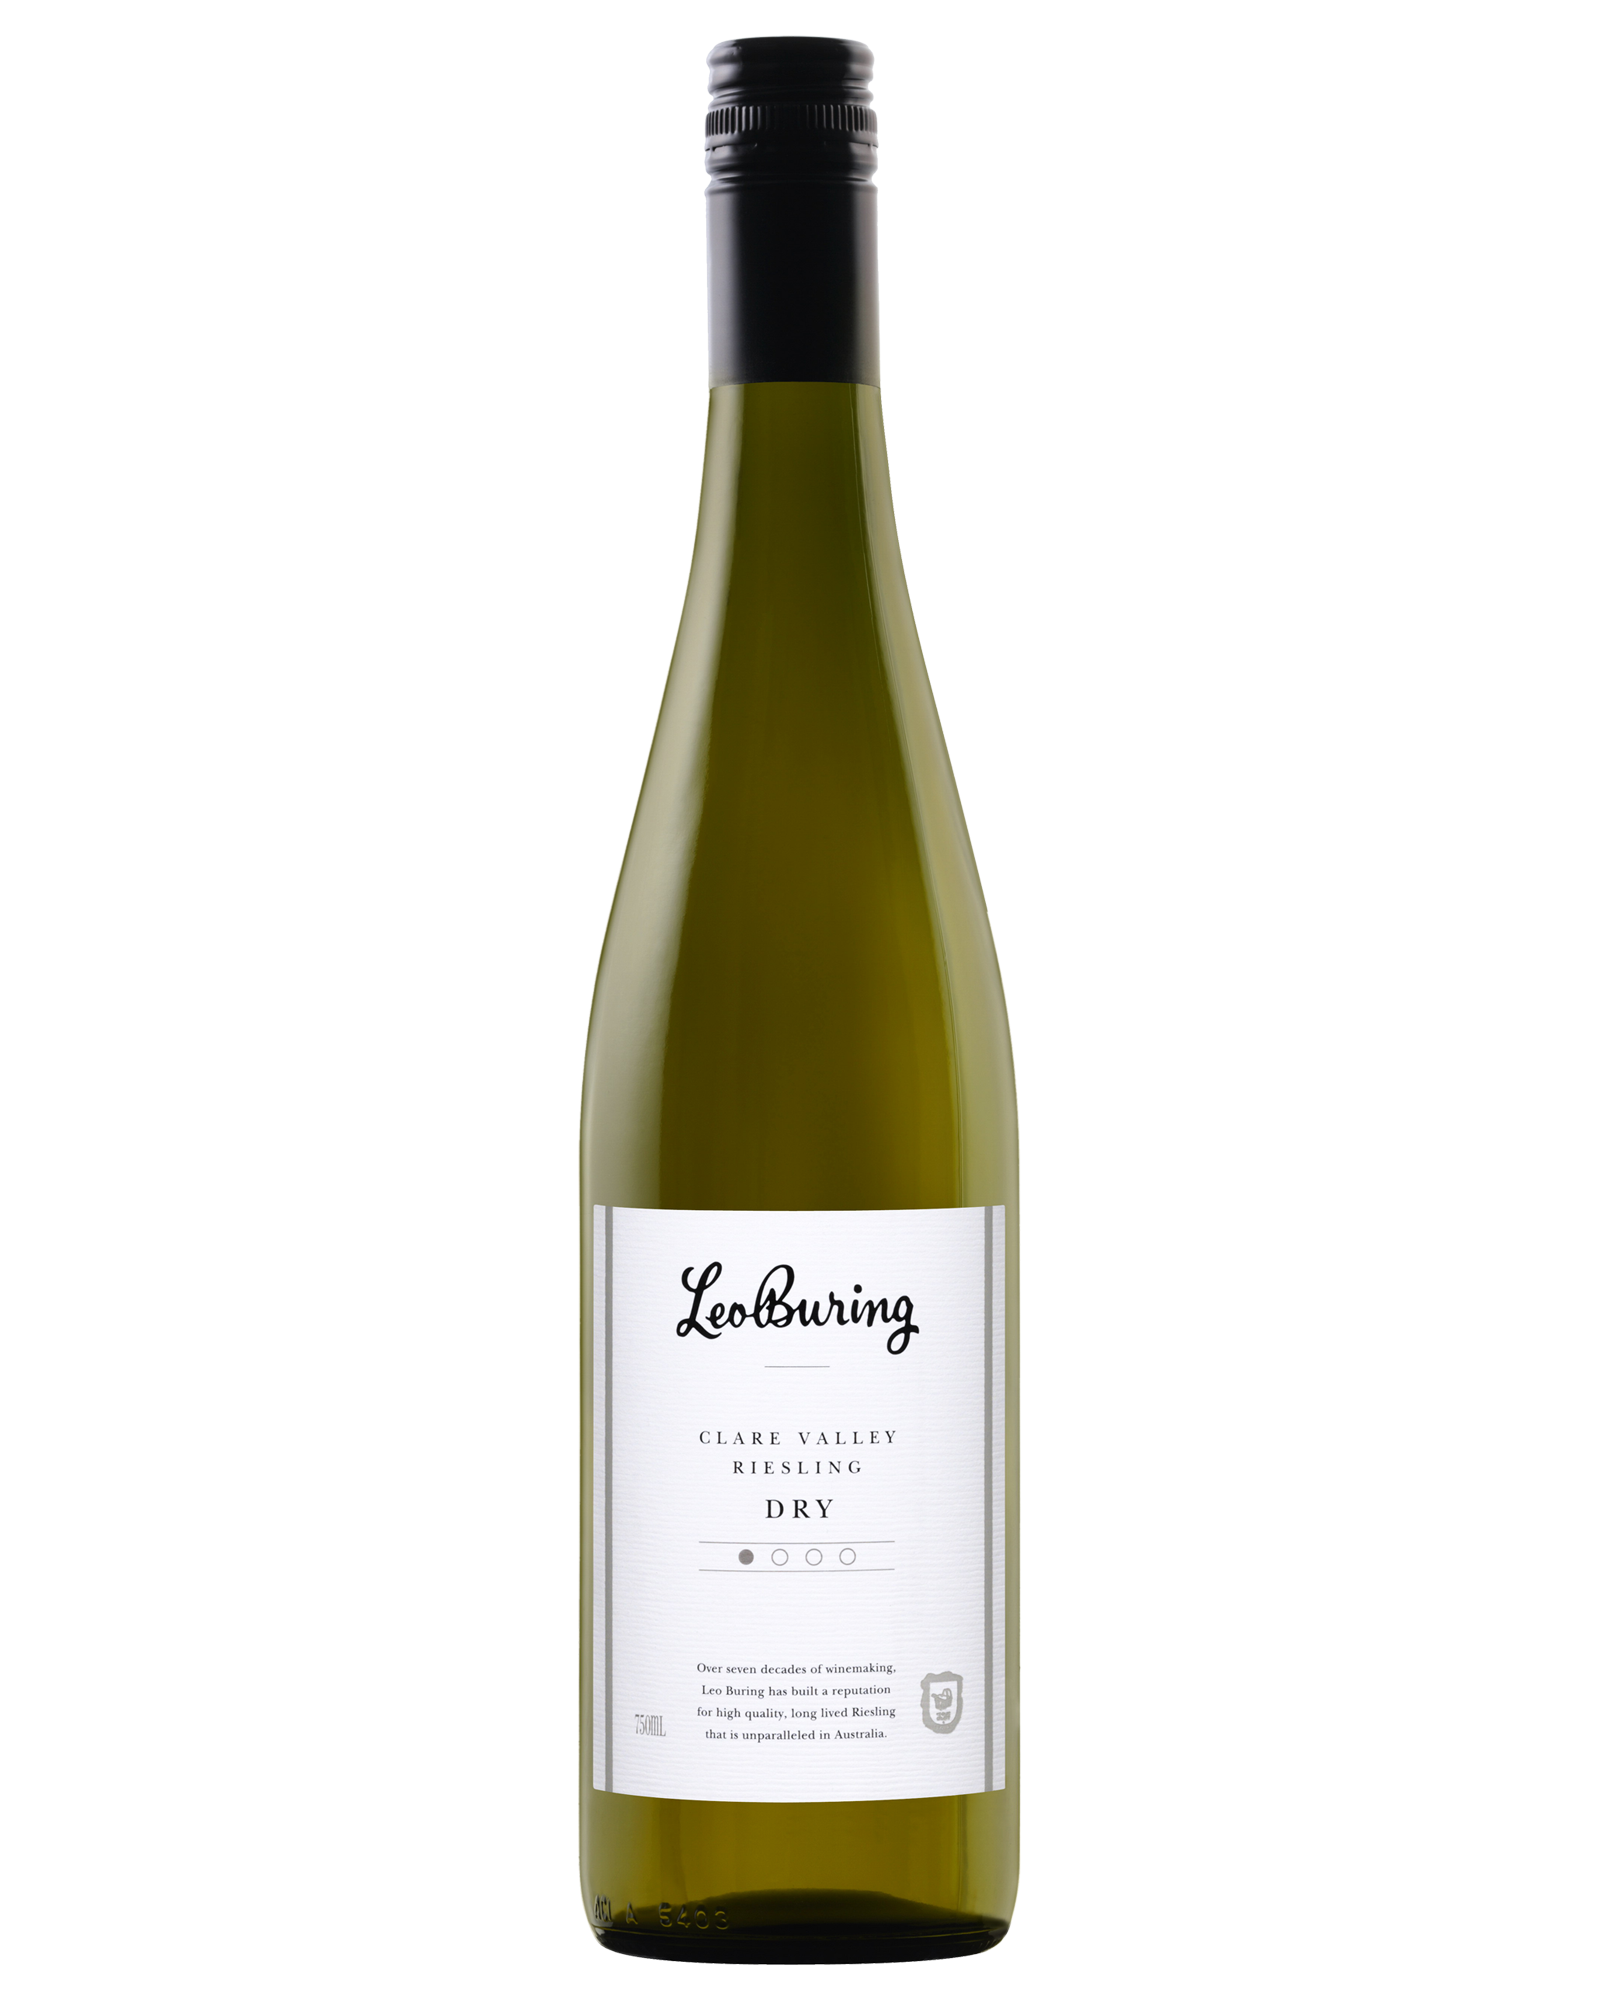 Leo Buring Dry Clare Valley Riesling 2011